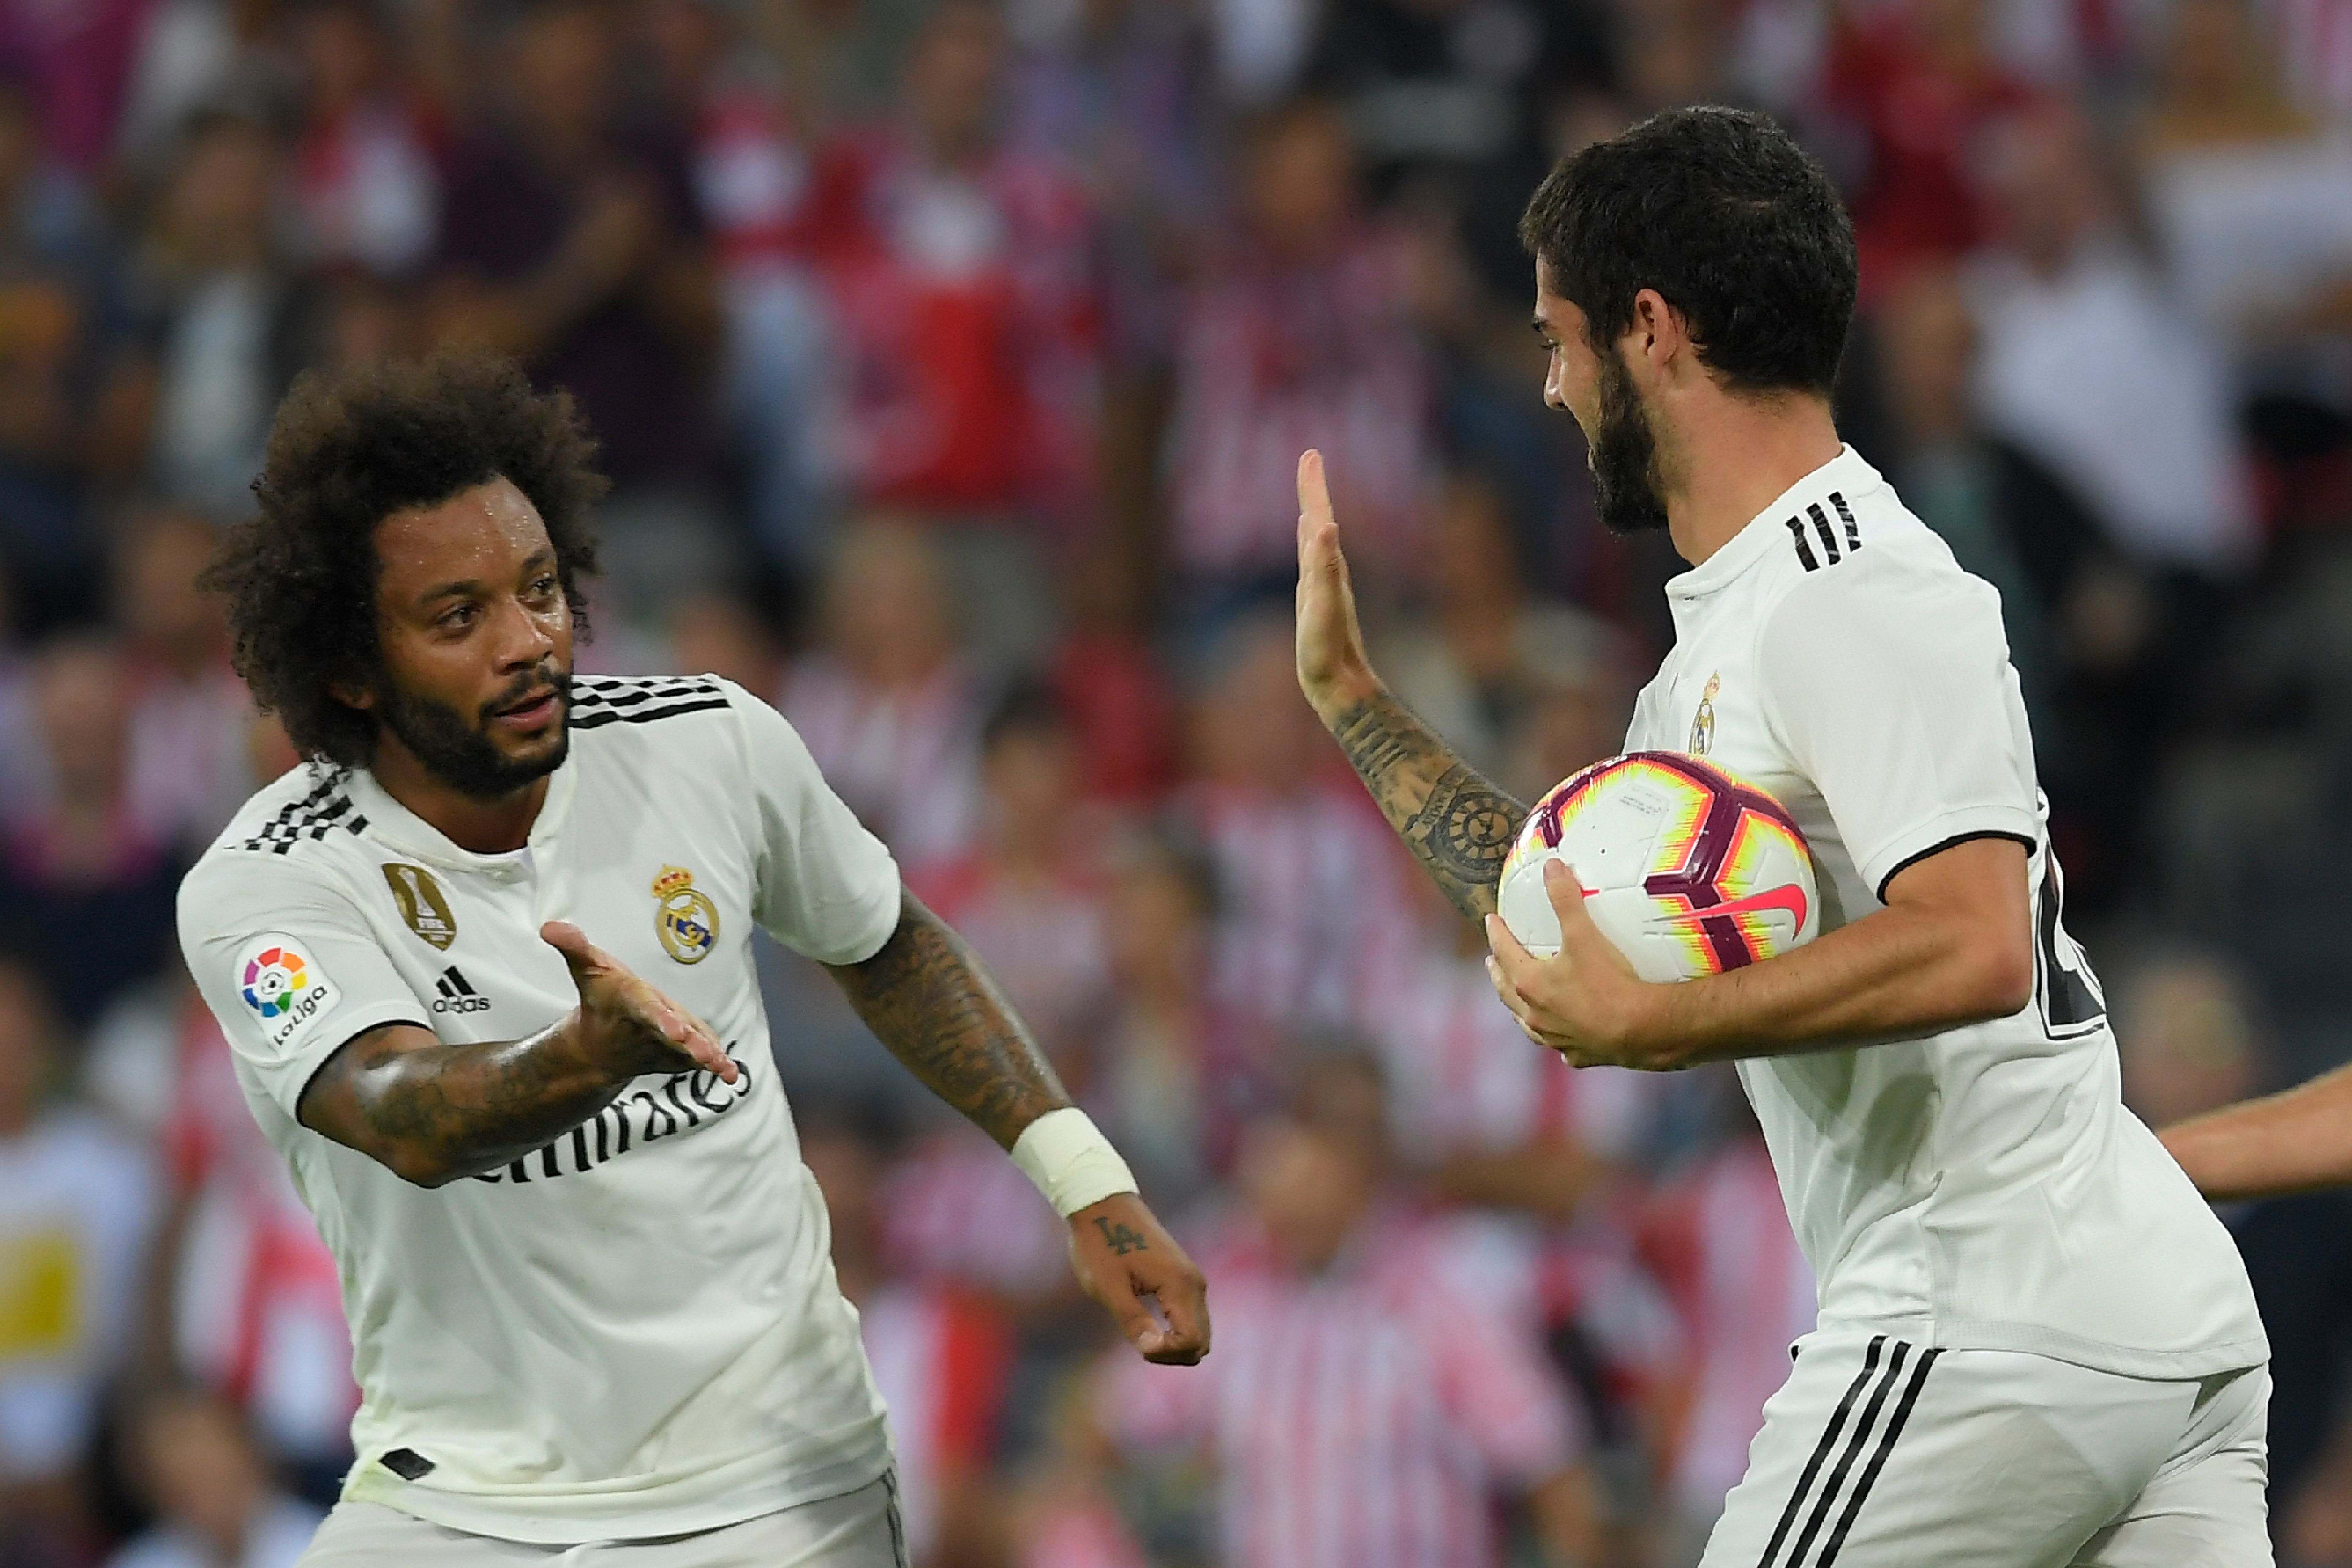 Real Madrid's Spanish midfielder Isco (R) celebrates with Real Madrid's Brazilian defender Marcelo after scoring during the Spanish league football match between Athletic Club Bilbao and Real Madrid CF at the San Mames stadium in Bilbao on September 15, 2018. (Photo by LLUIS GENE / AFP)        (Photo credit should read LLUIS GENE/AFP/Getty Images)